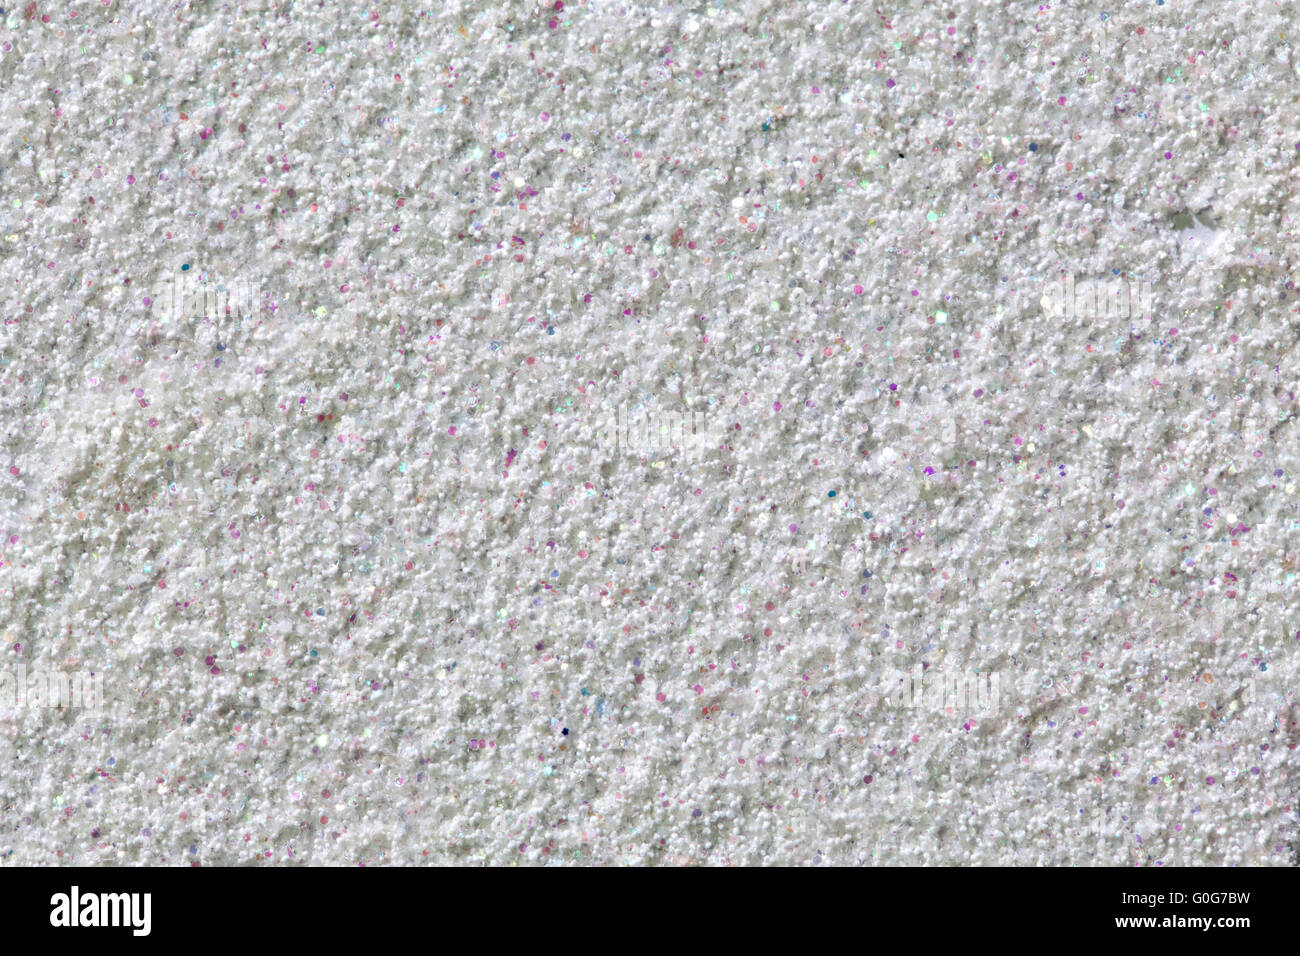 White wall background with colorful spots. A high resolution macro photograph Stock Photo